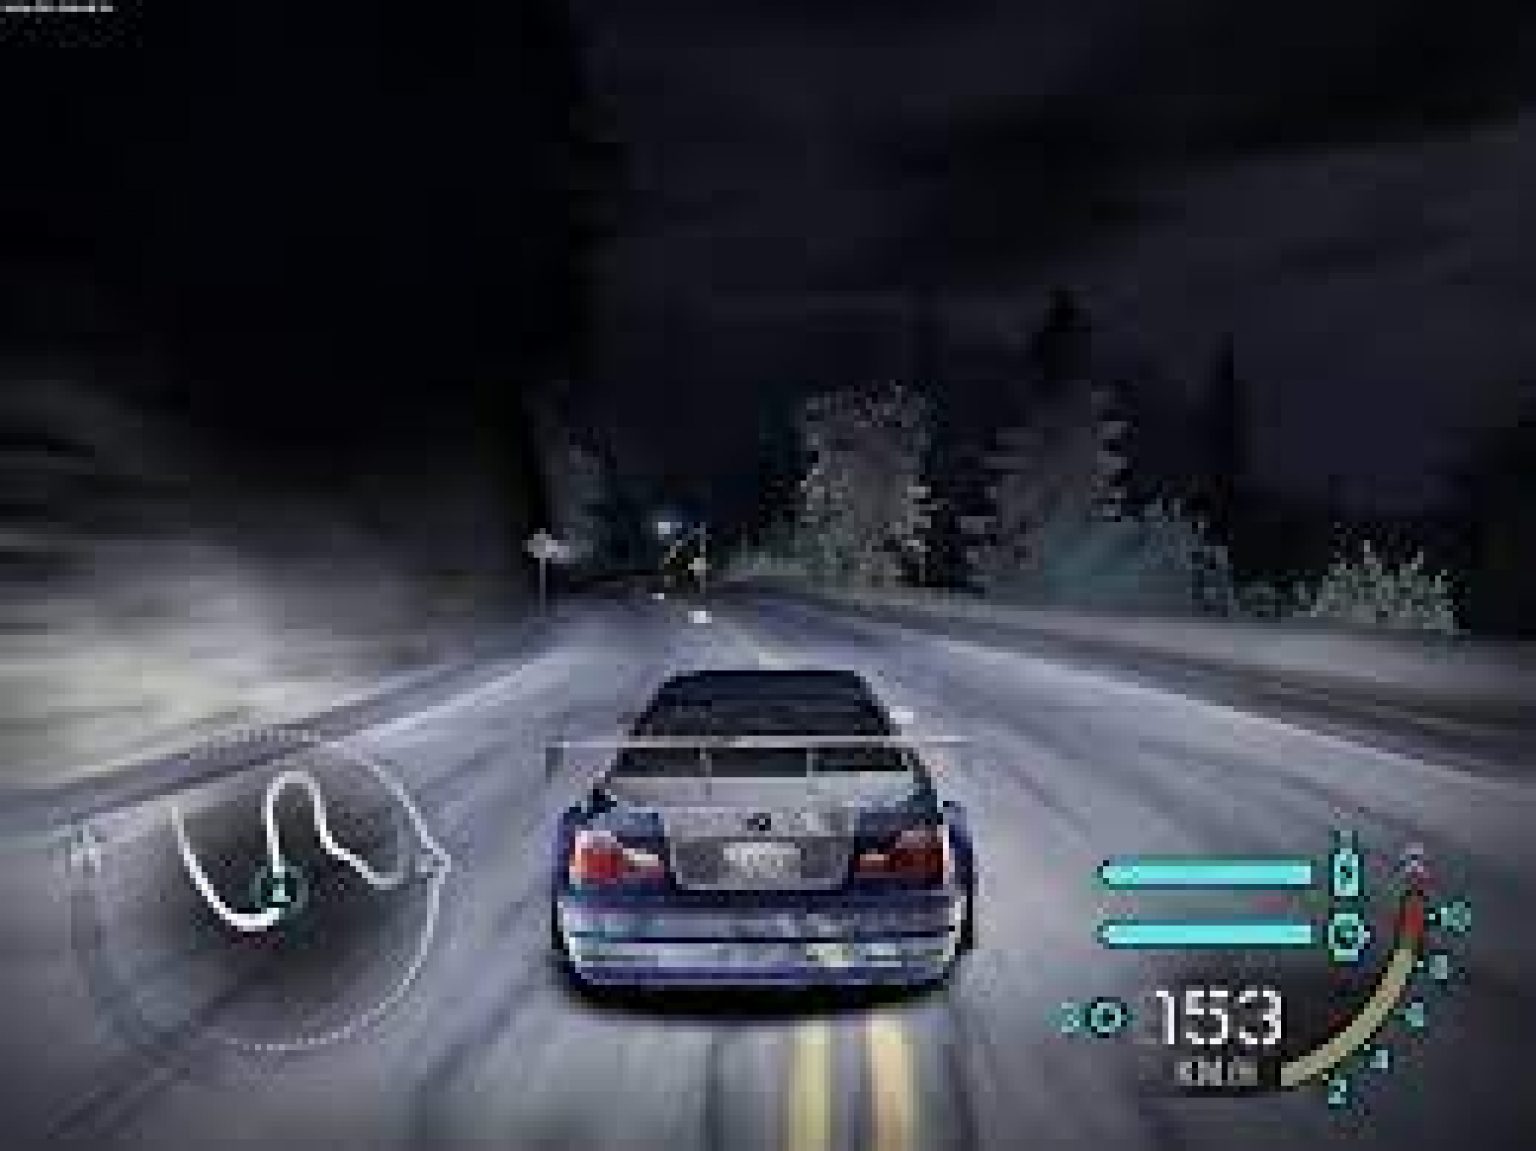 nfs carbon full version for pc highly compressed